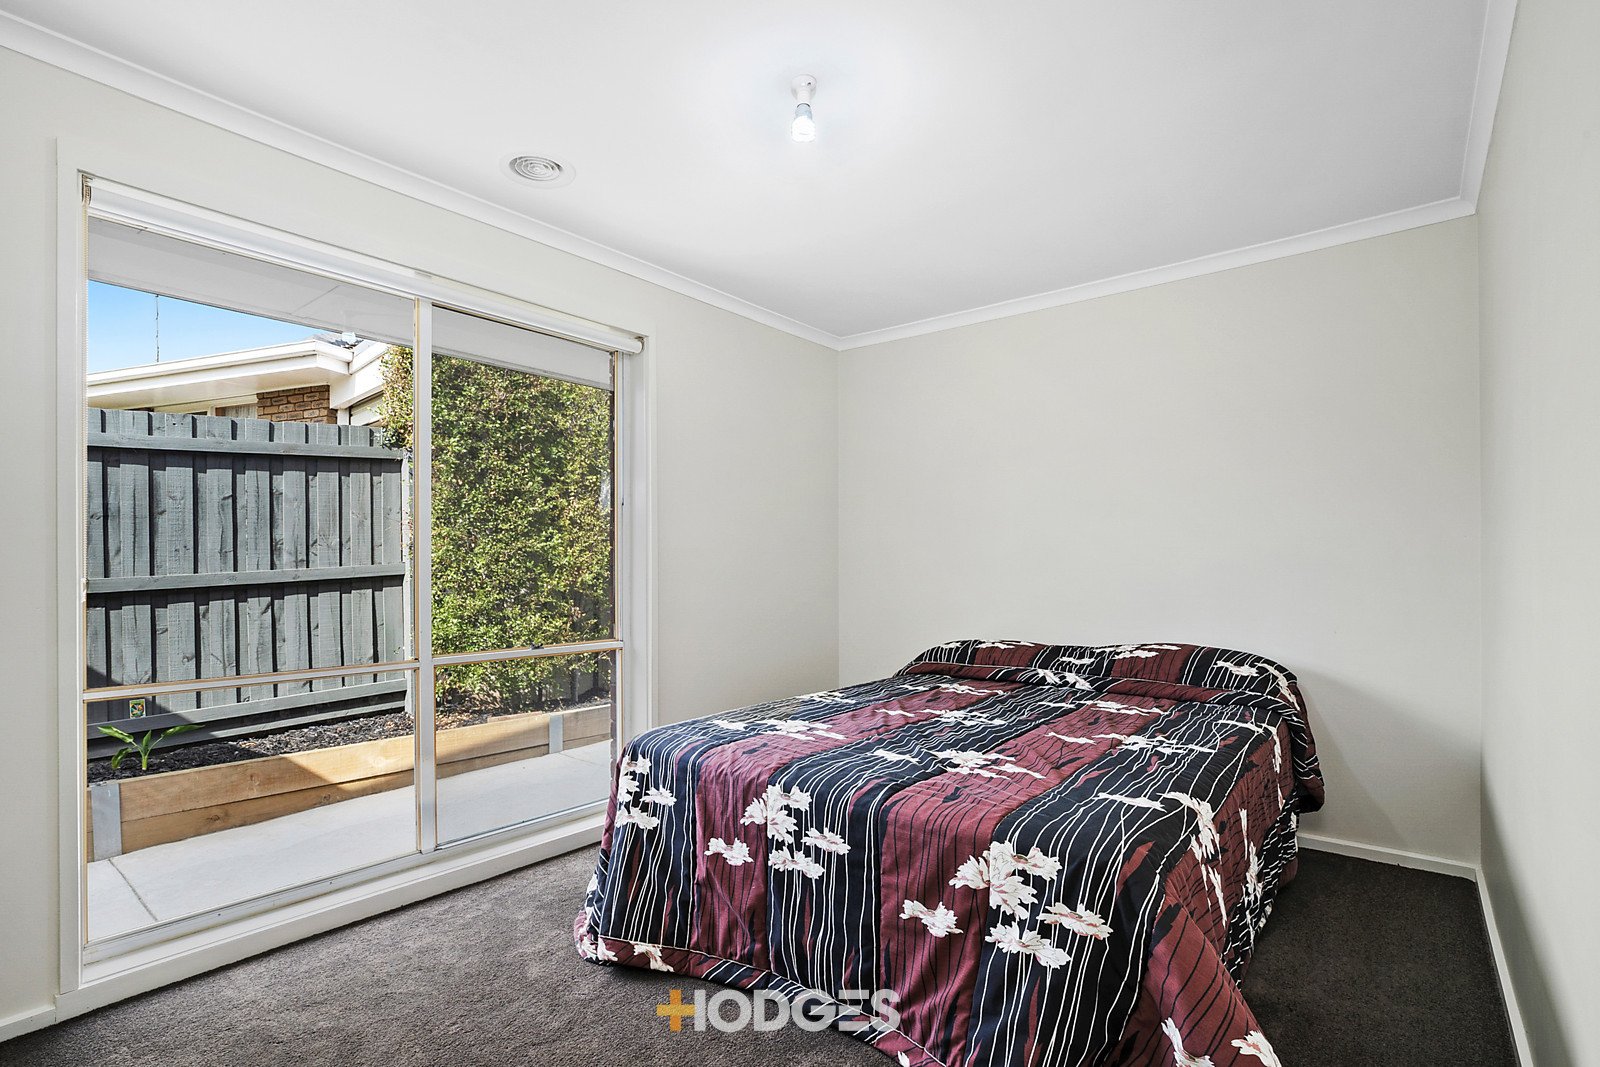 9 Tabulam Court Grovedale